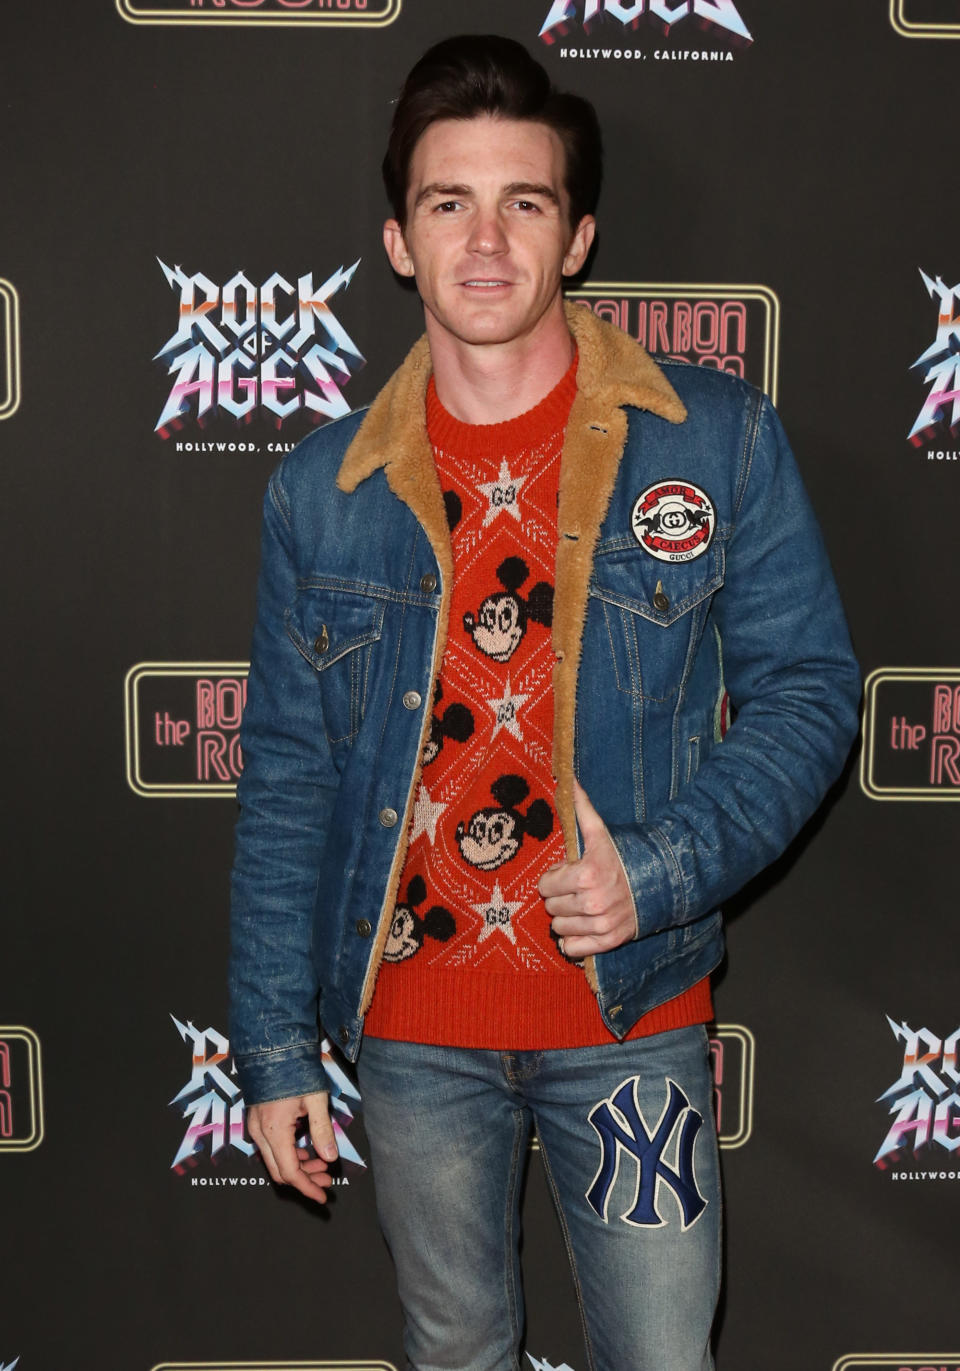 HOLLYWOOD, CALIFORNIA - JANUARY 15: Actor Drake Bell attends the opening night of "Rock Of Ages" at The Bourbon Room on January 15, 2020 in Hollywood, California. (Photo by Paul Archuleta/Getty Images)